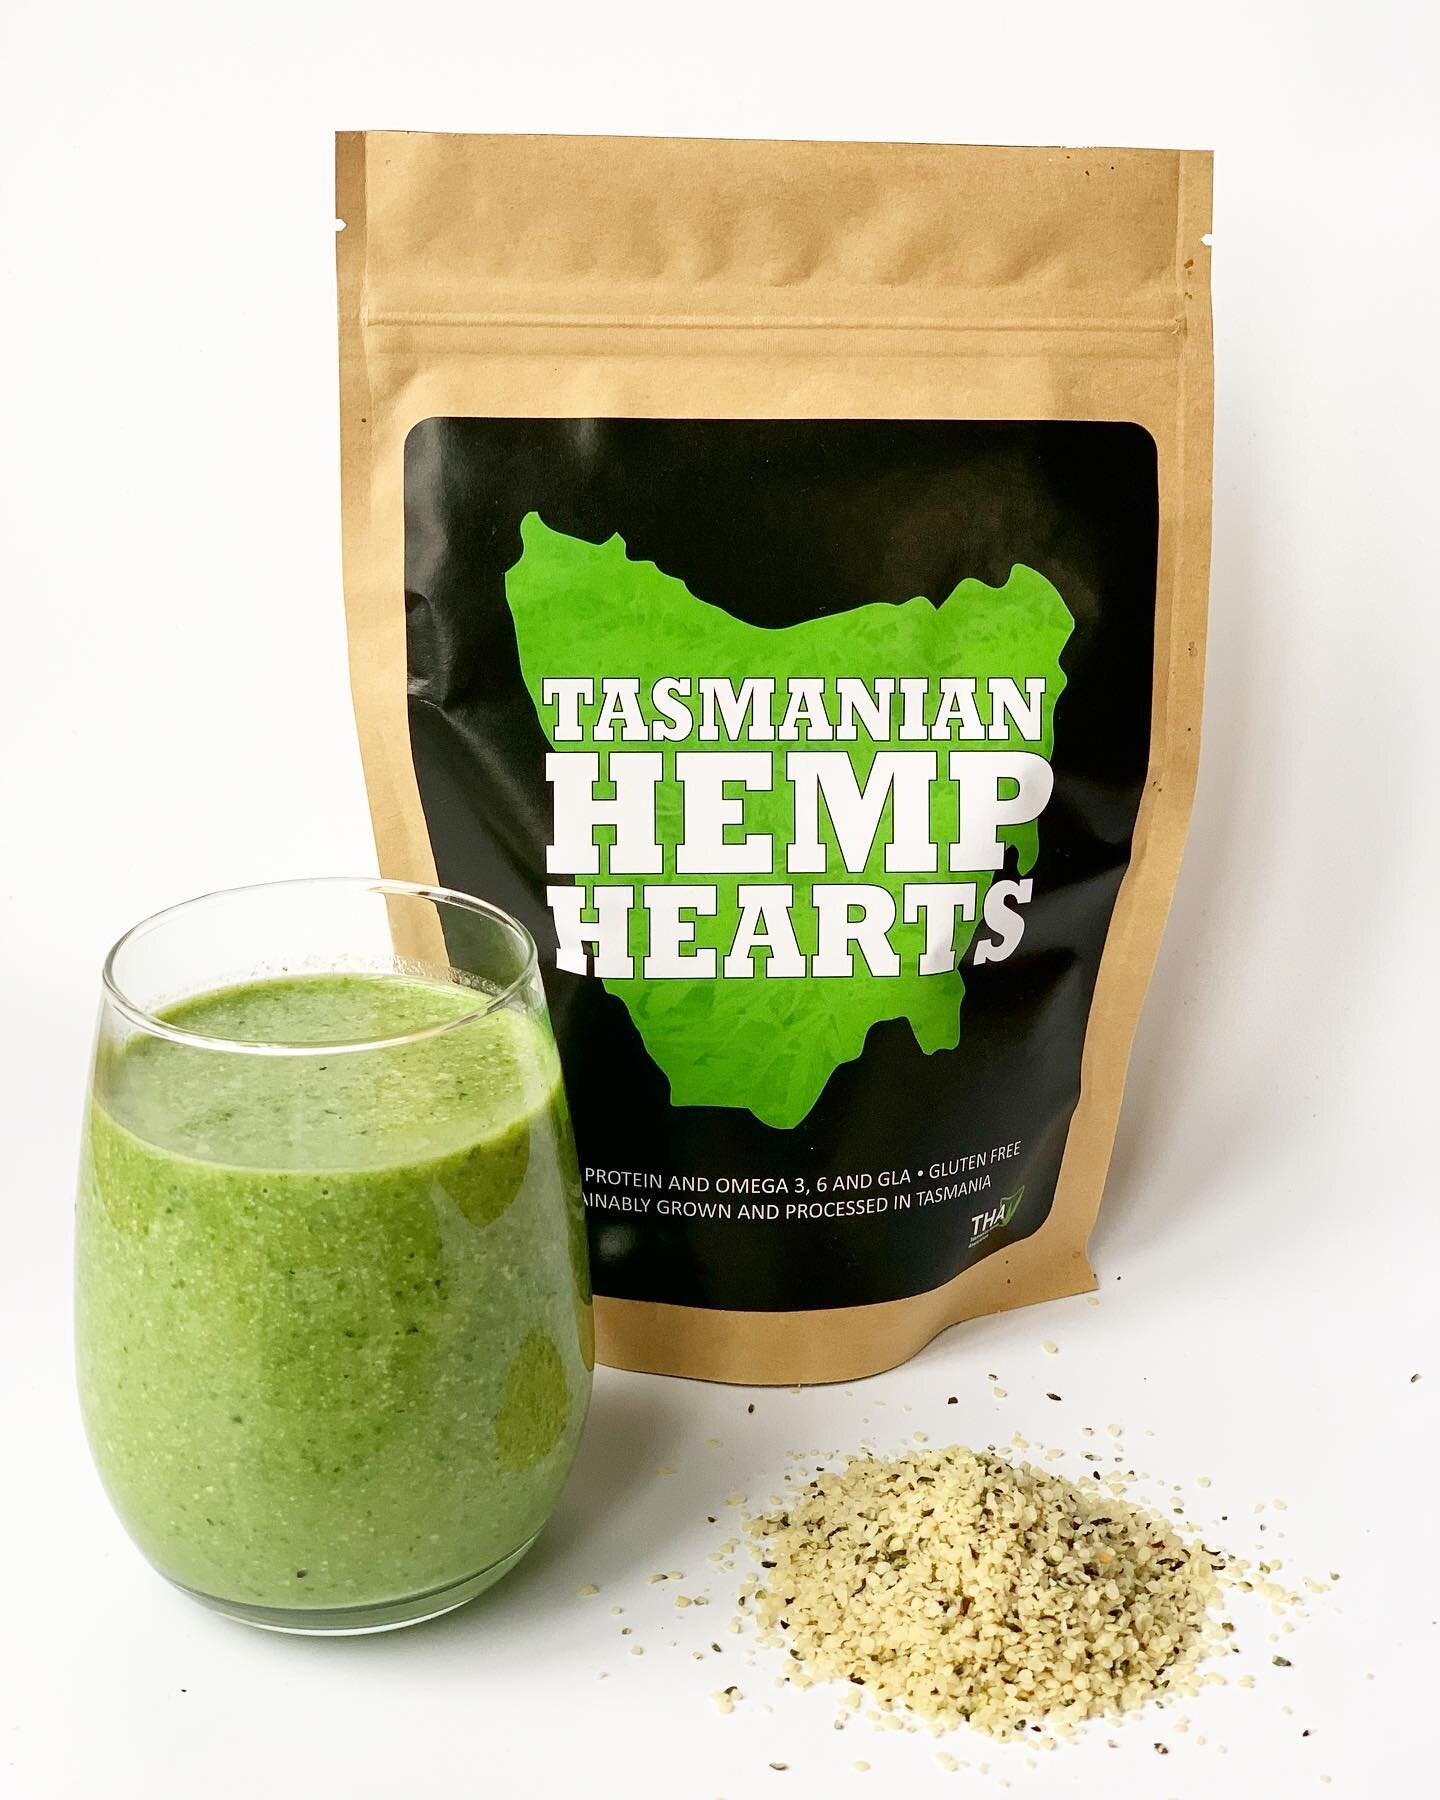 🌱🥤Hemp Heart Smoothie Recipe

All you need is:
🌱1 banana
🌱1 heaped table spoon of hemp hearts
🌱1 handful of spinach
🌱Your choice of milk or water 😋🌱🍌 
Best served chilled!

🌱A great energy boost for any time of day! 

#tasmanianhemphearts #